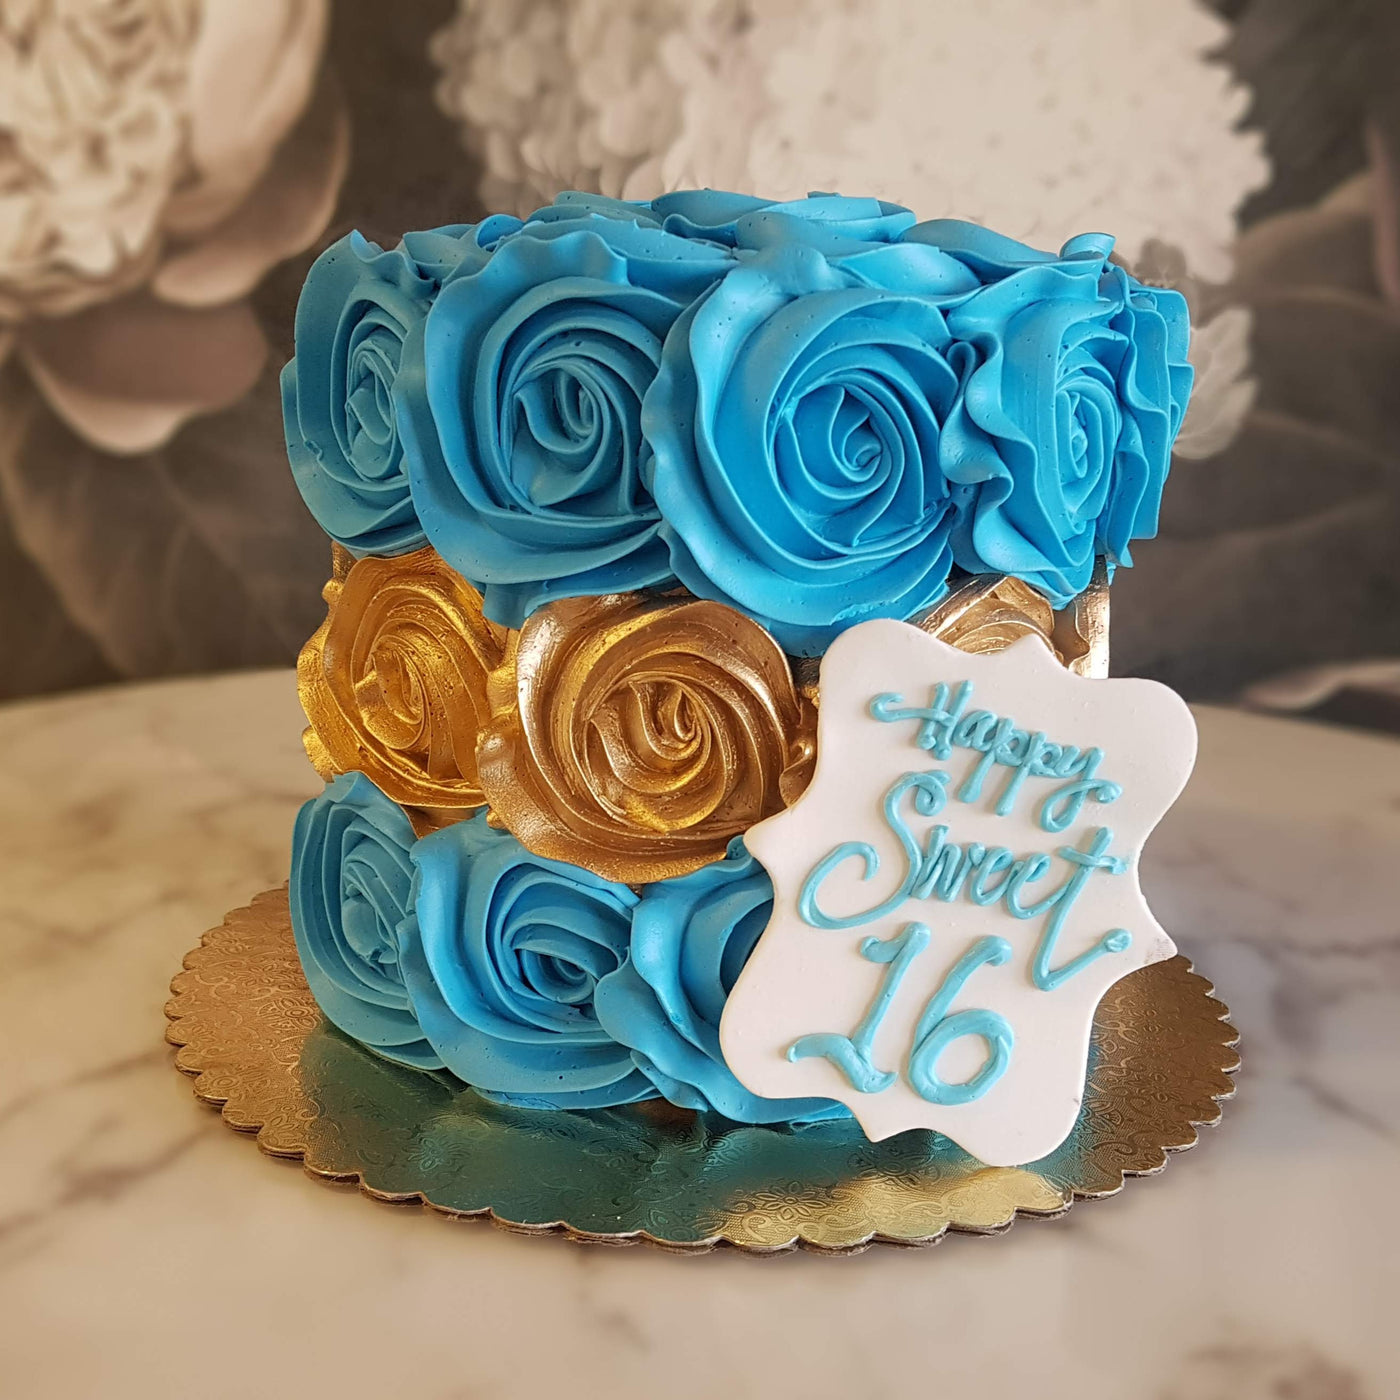 blue cake sweet 16, quince cake, small debut cake